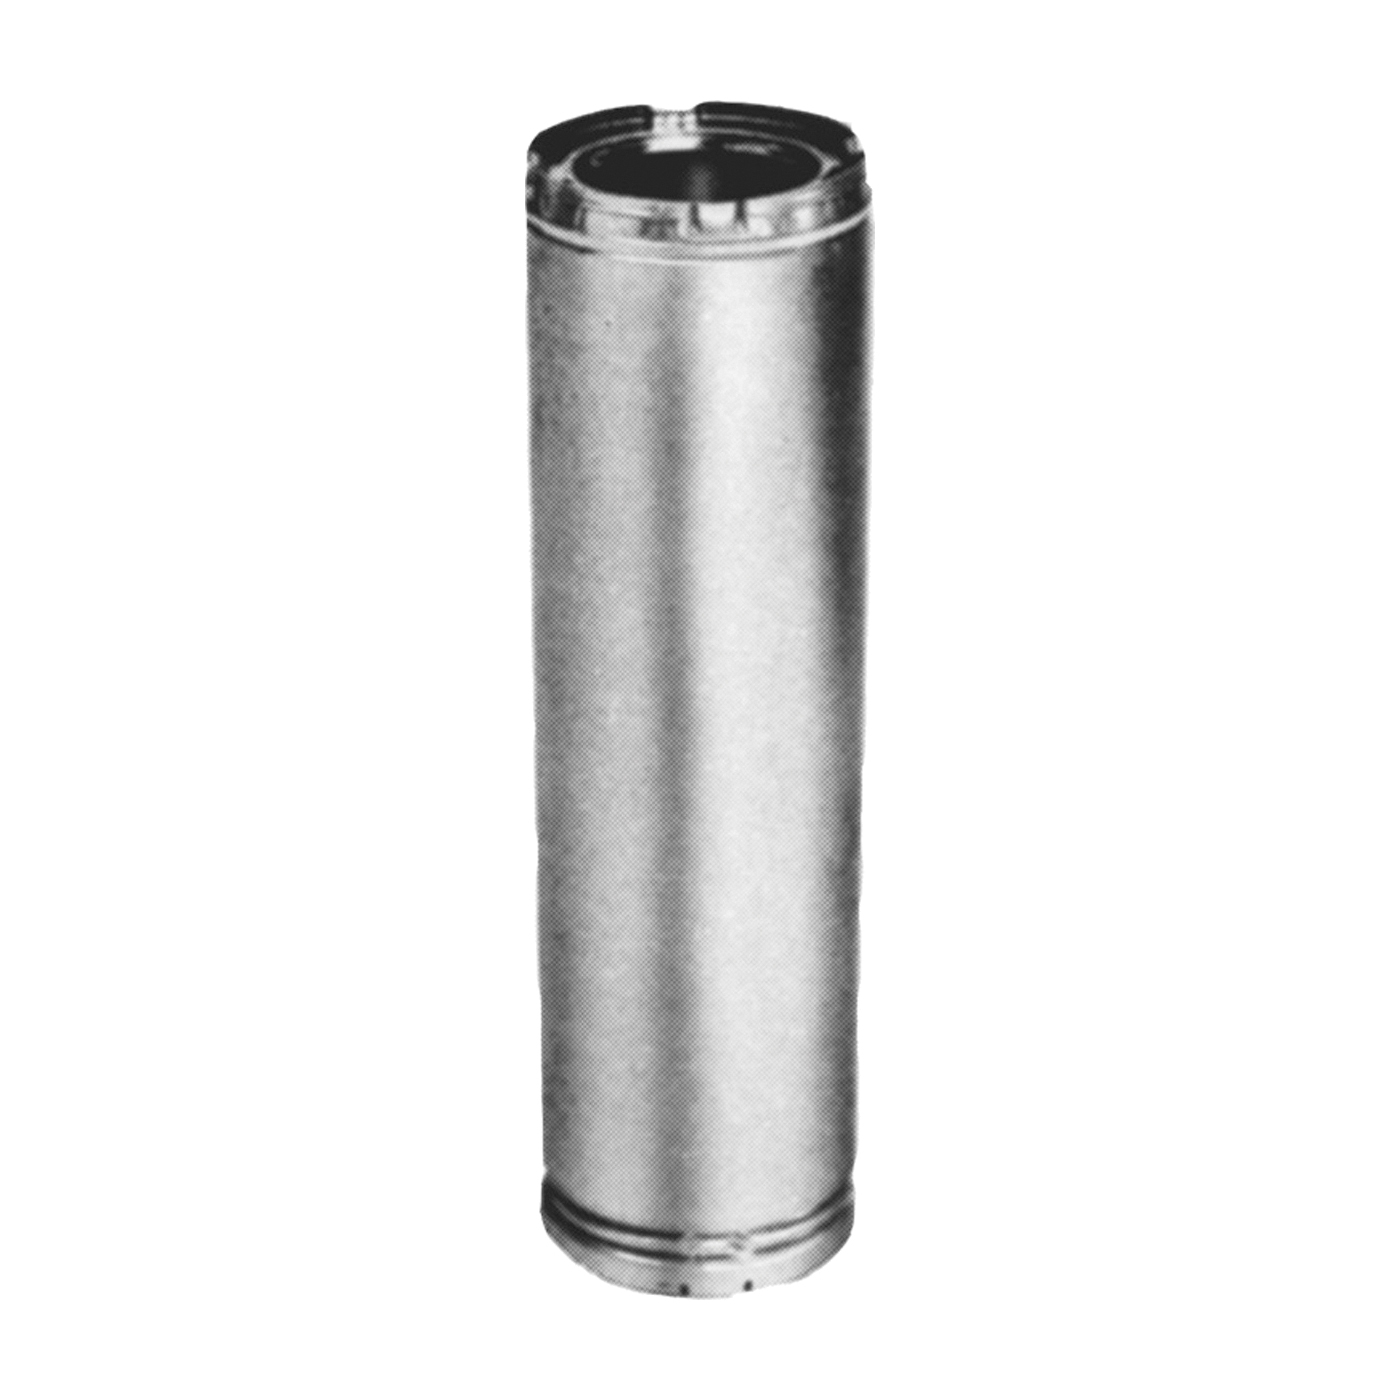 8HS-36 Chimney Pipe, 11 in OD, 36 in L, Galvanized Stainless Steel